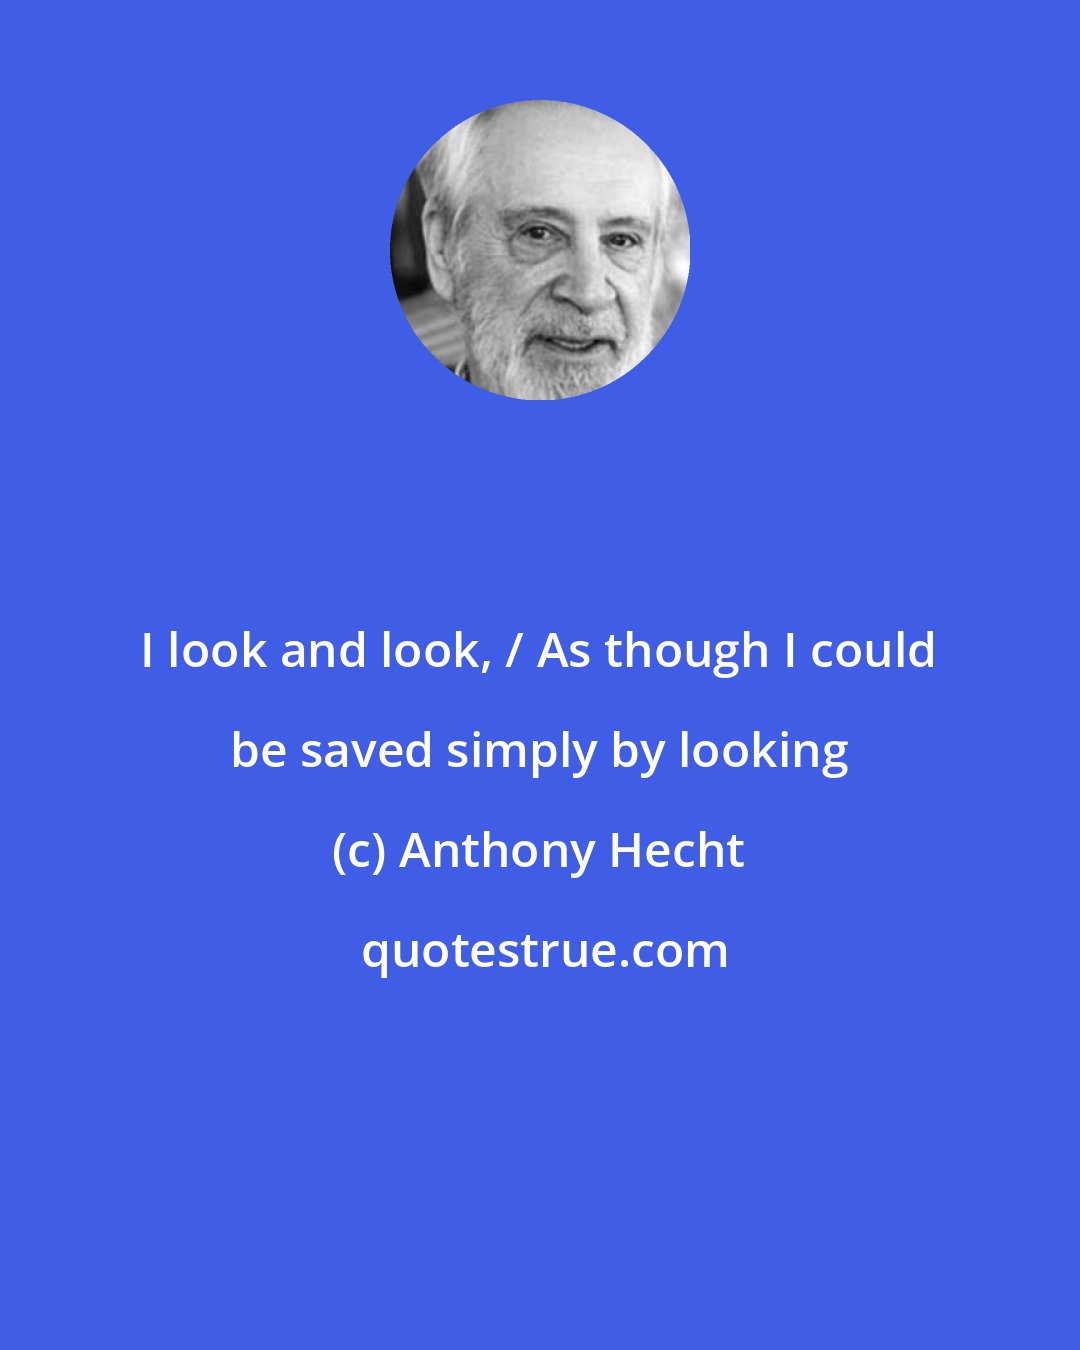 Anthony Hecht: I look and look, / As though I could be saved simply by looking